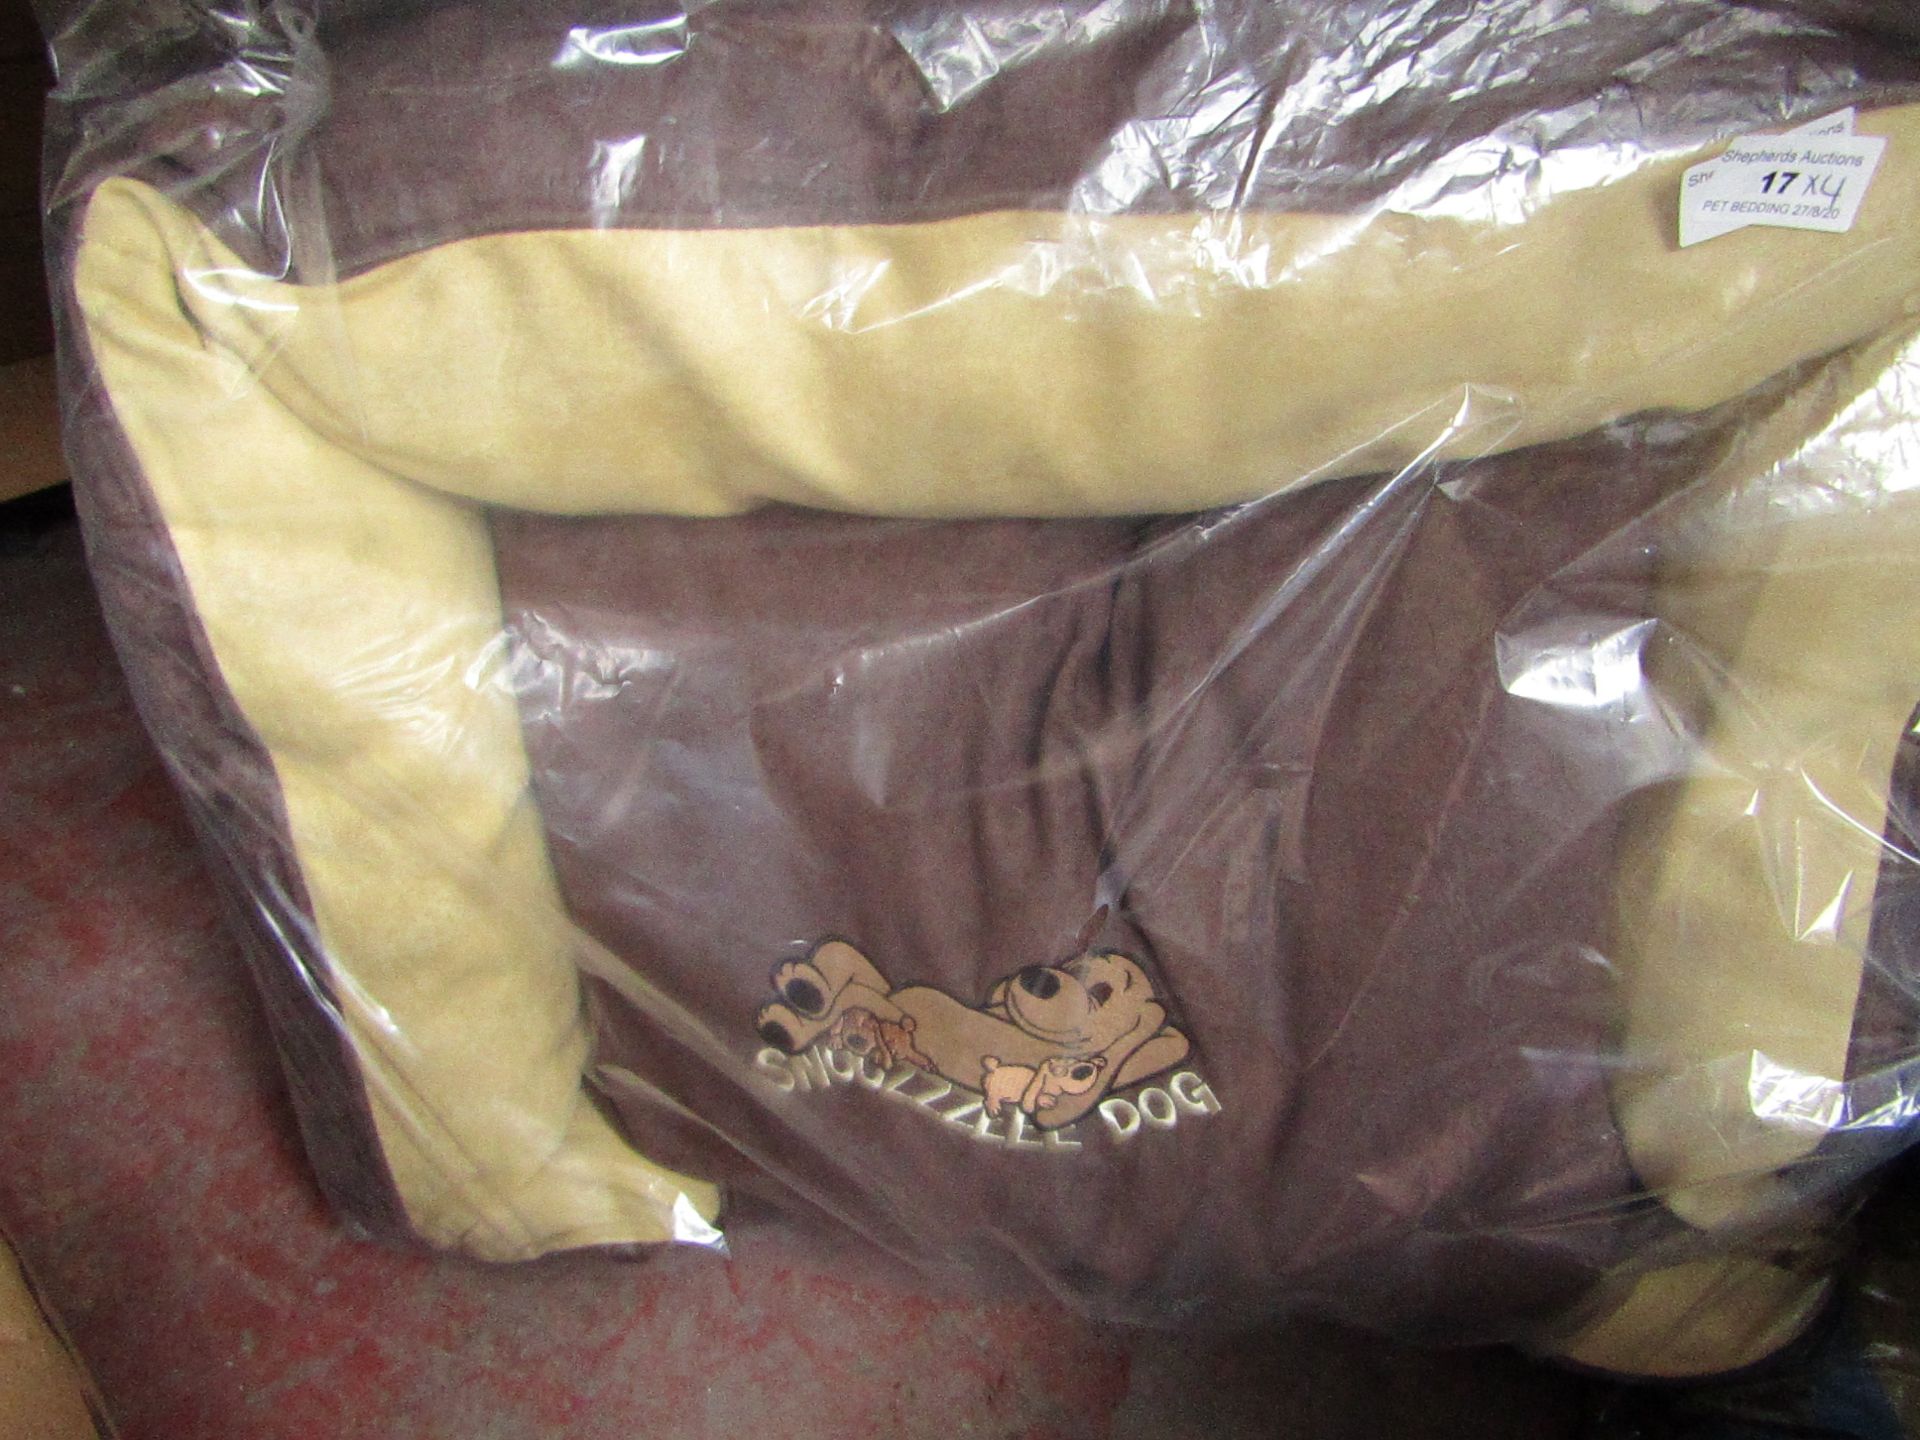 4x Snoozzzeee Dog - Brown Sofa Dog Bed (23") - All New & Packaged.